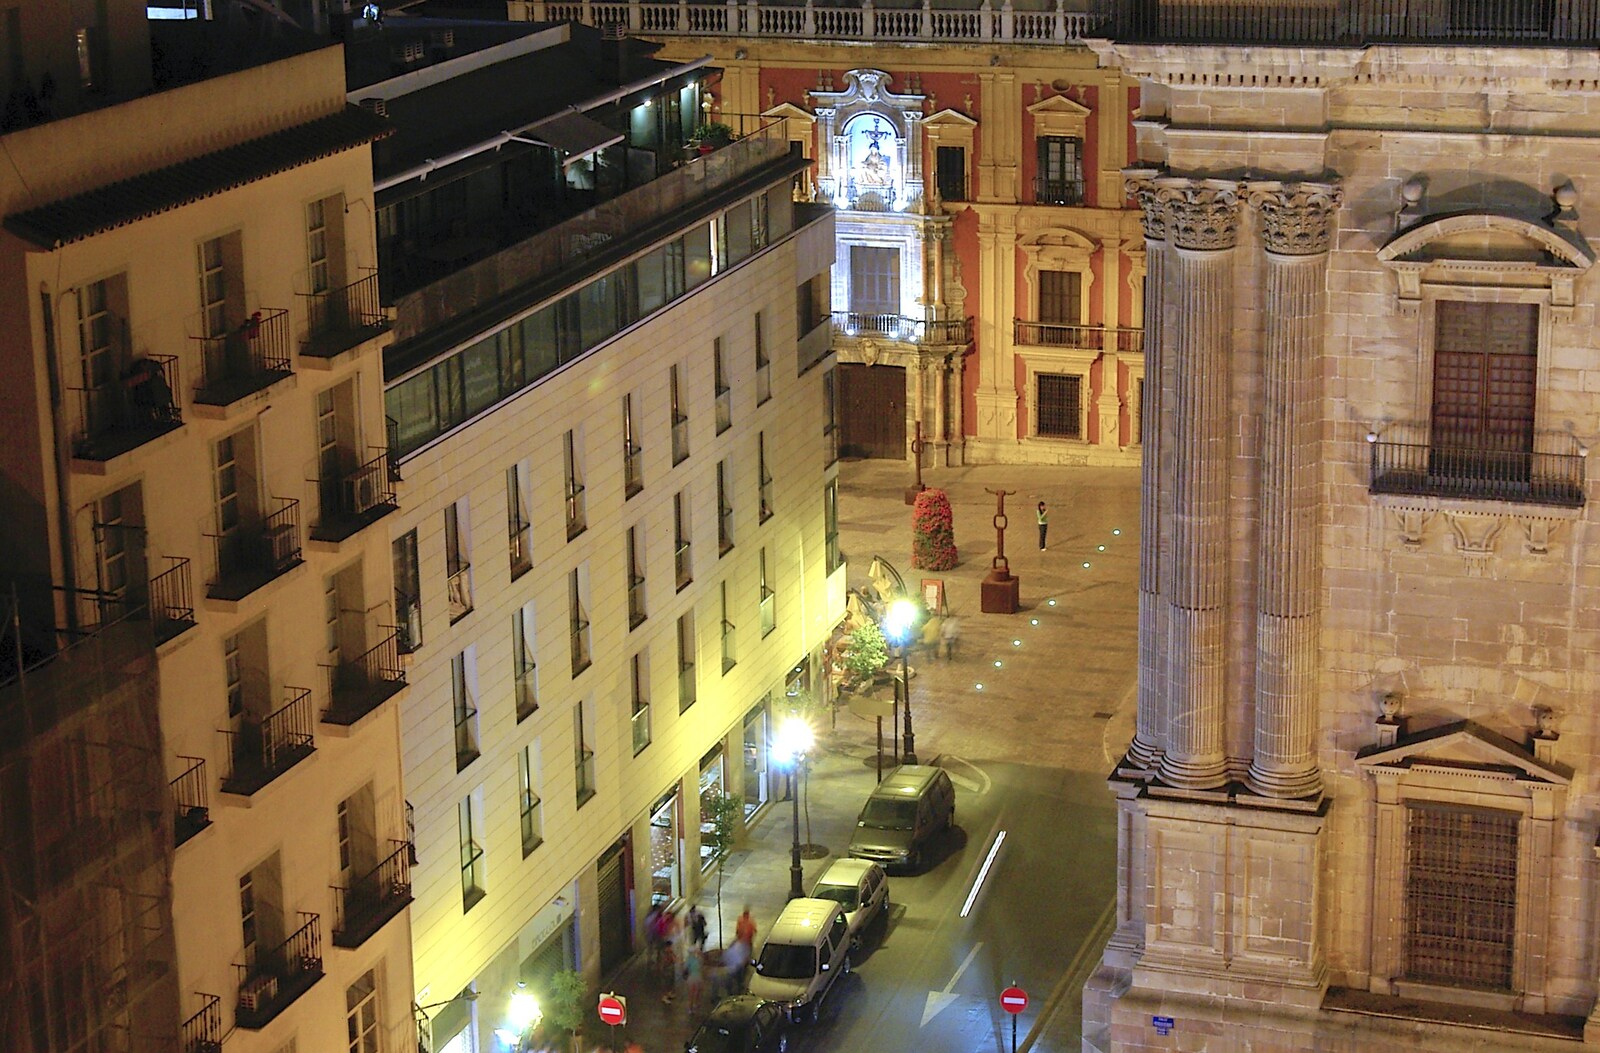 Calle Molina and the corner of the cathedral from Working at Telefónica, Malaga, Spain - 6th June 2006